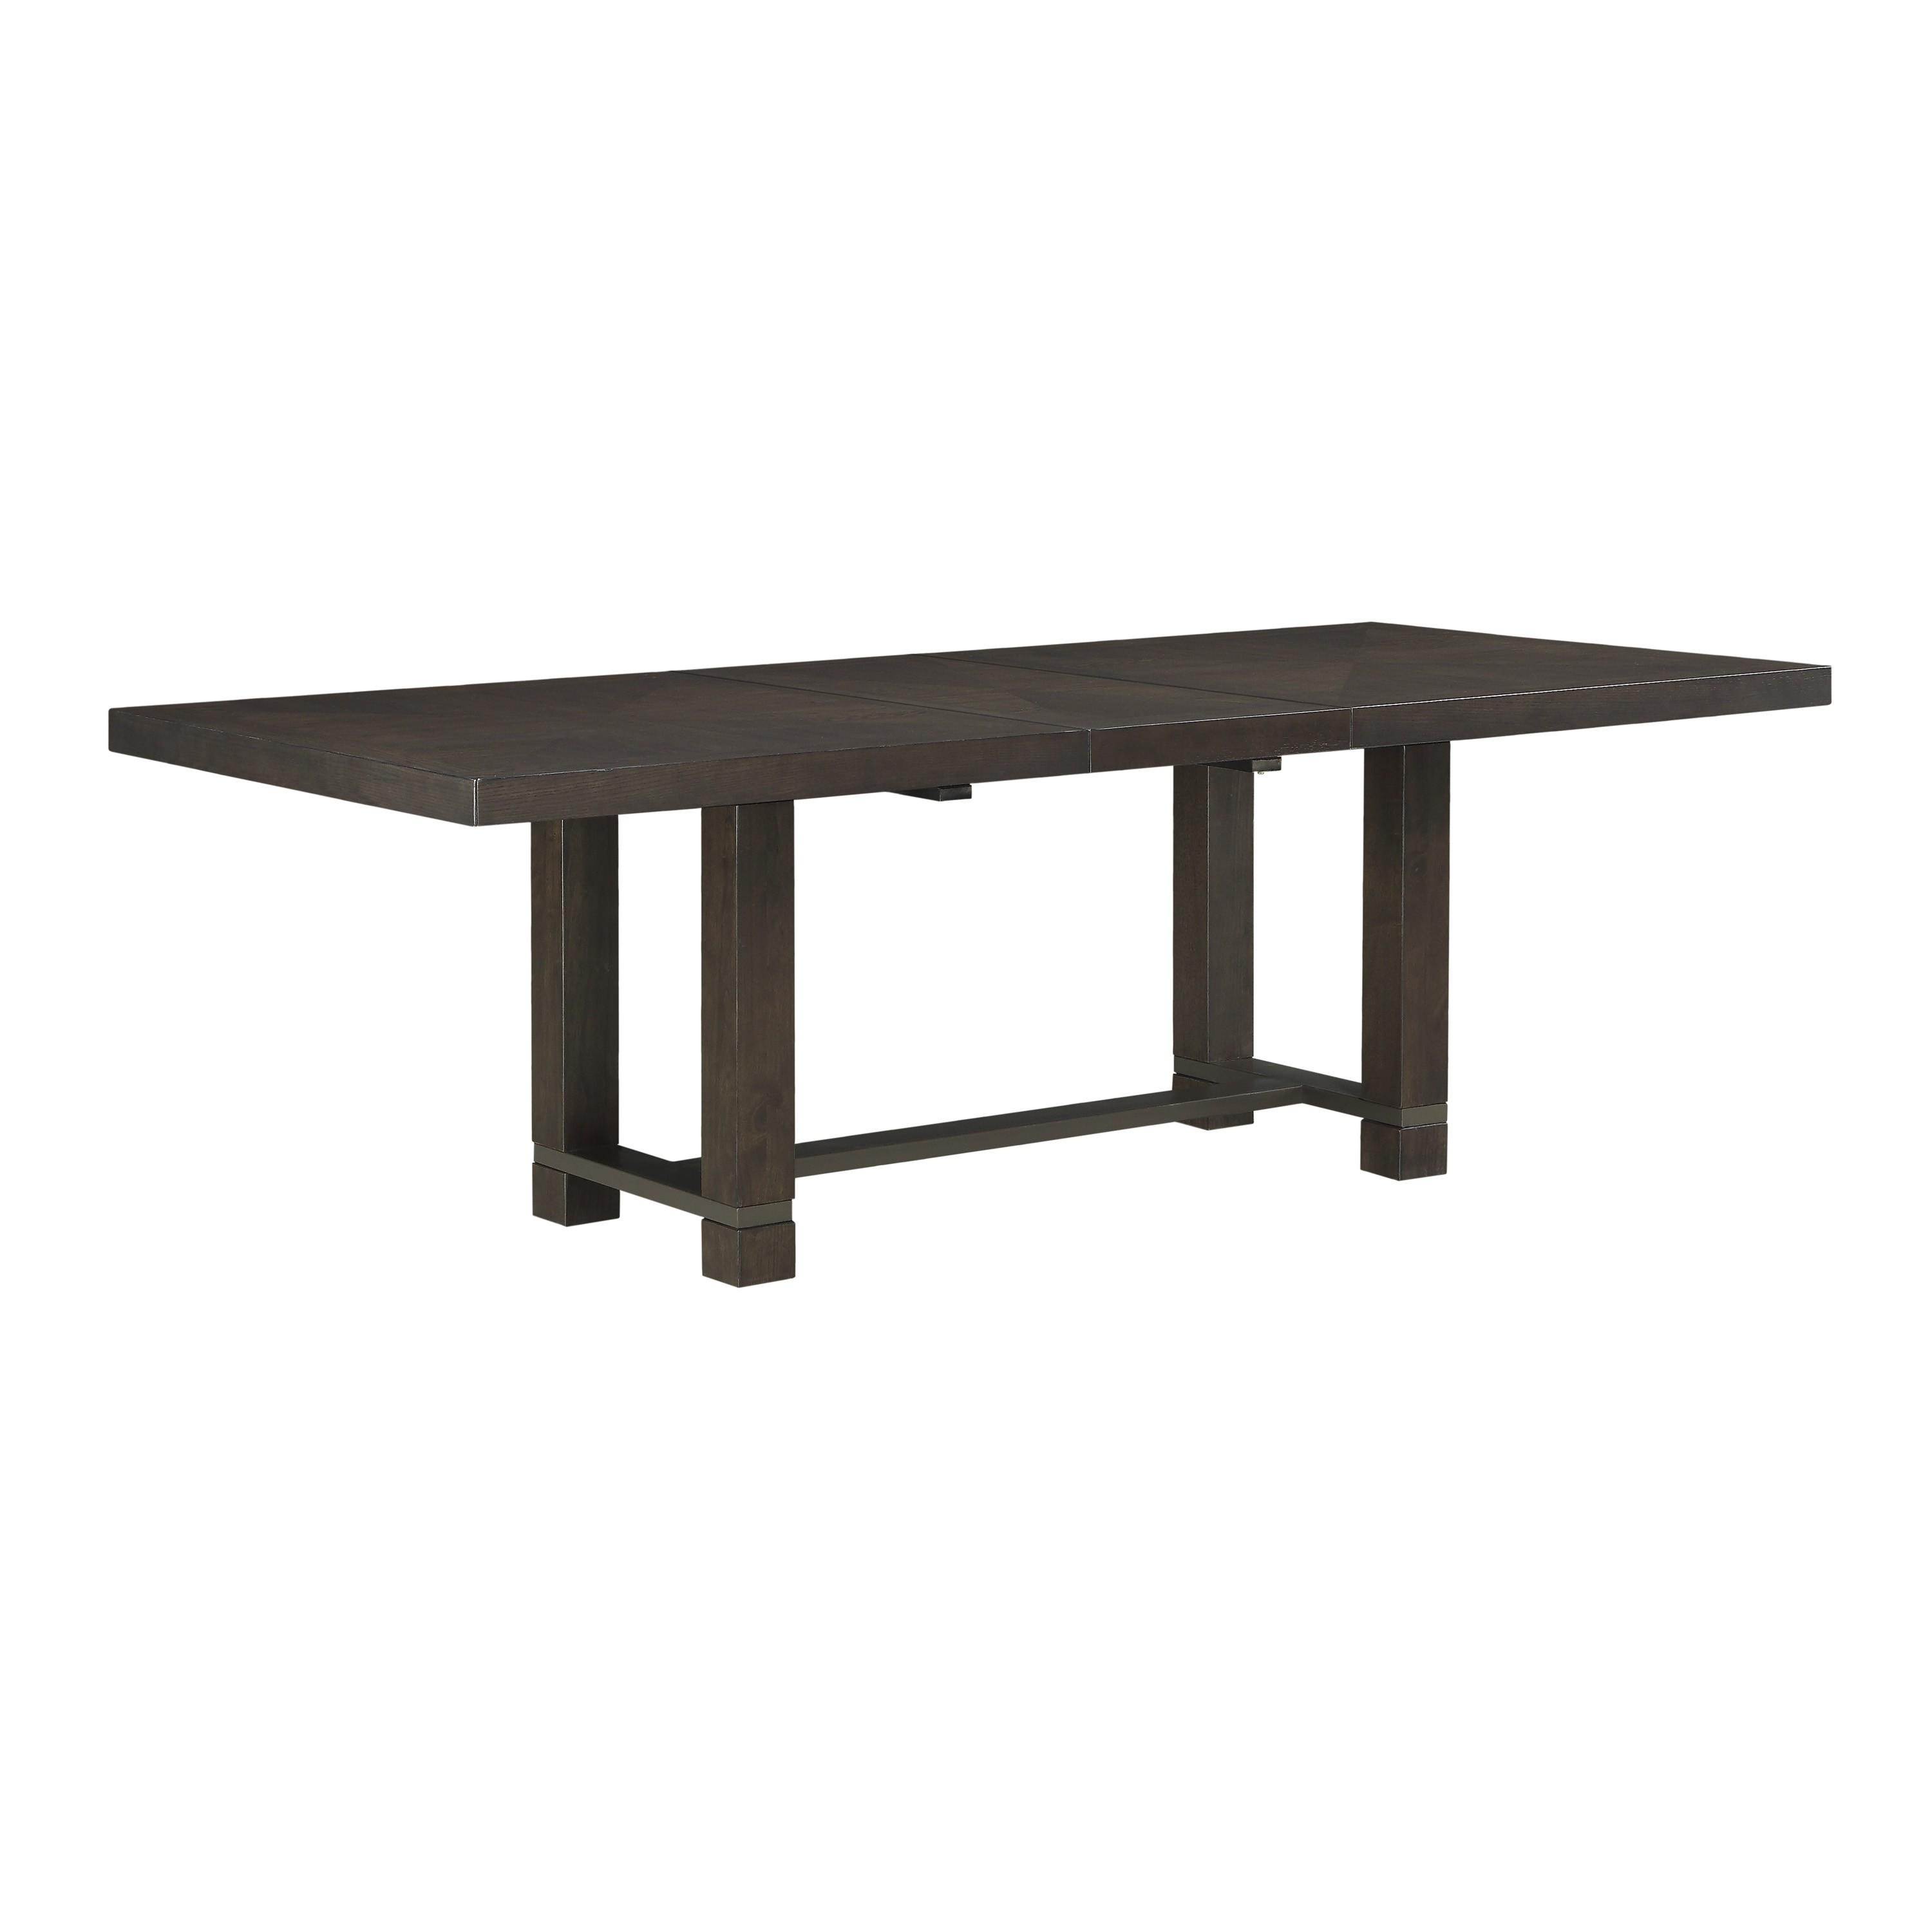 Homelegance 5654-92 Rathdrum Dining Table